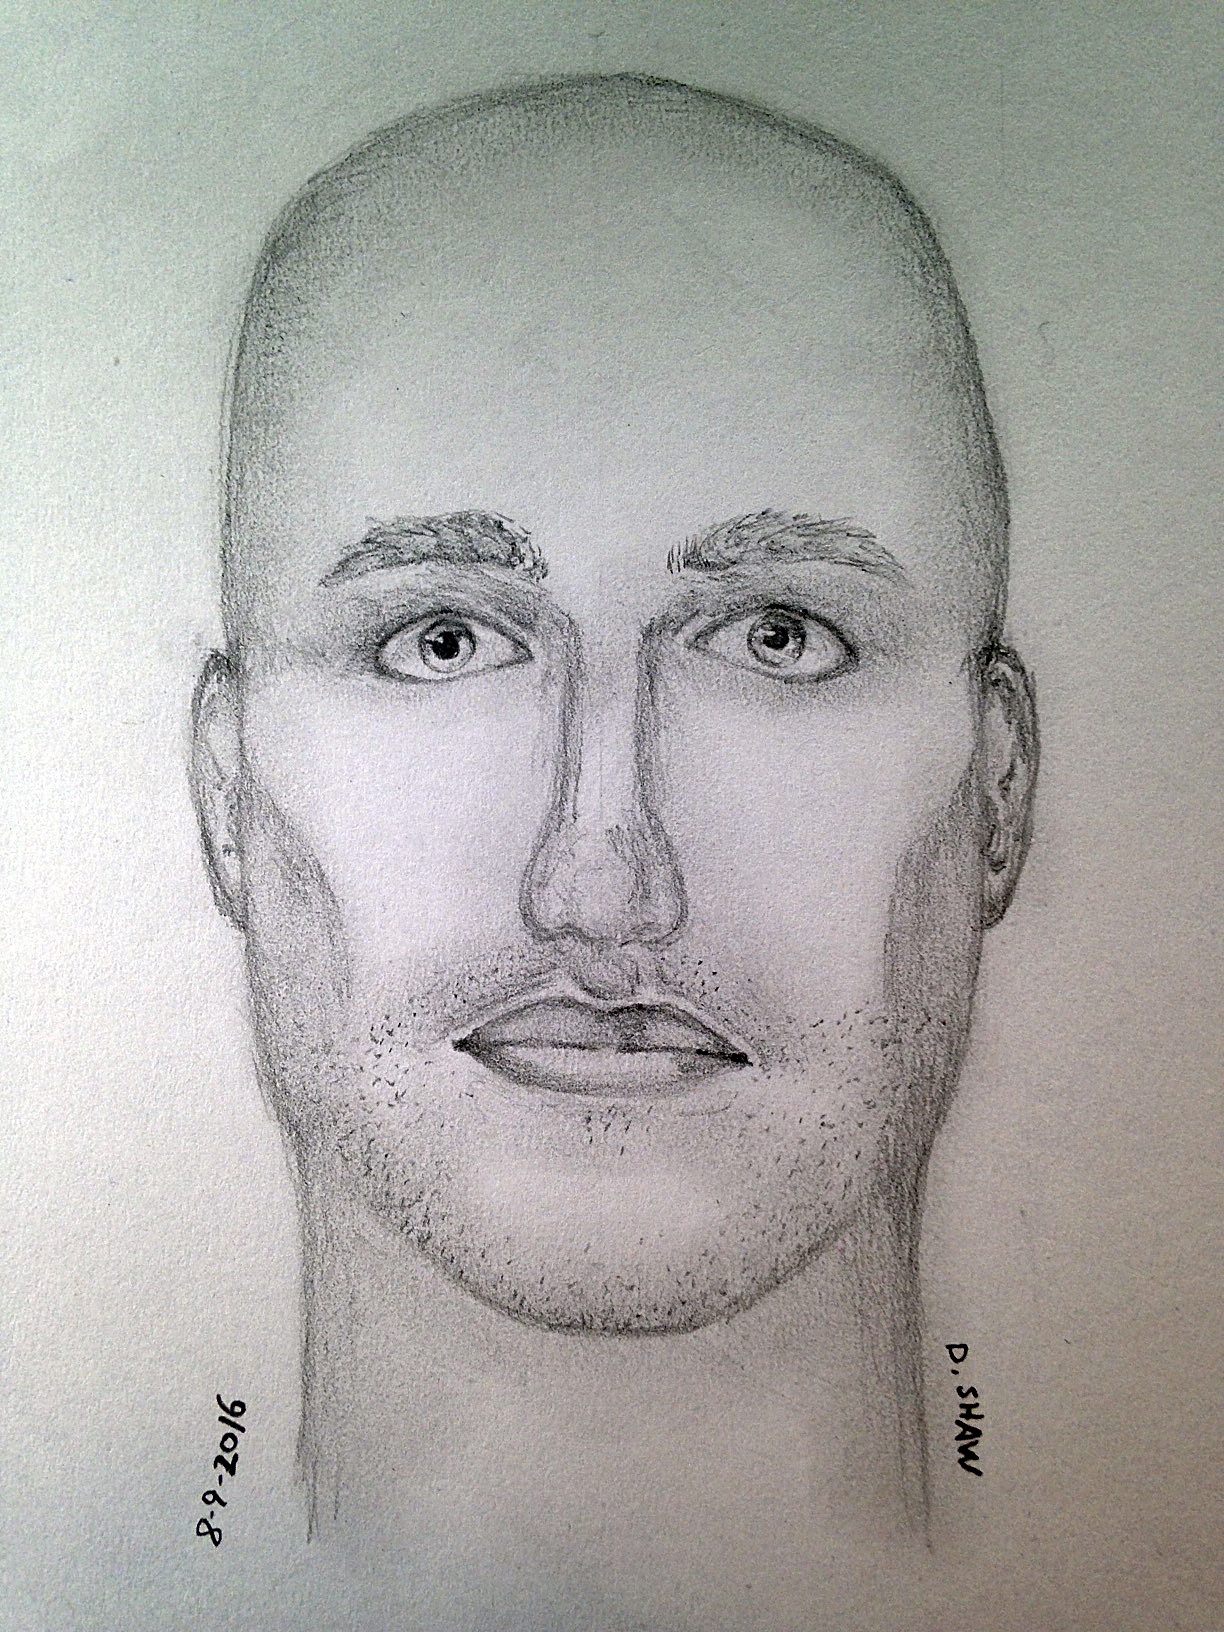 Photo courtesy of King County Sheriff's Office.  The King County Sheriff's Office has released this sketch of the suspect in the Marymoor Park Trail attack. If you see this man